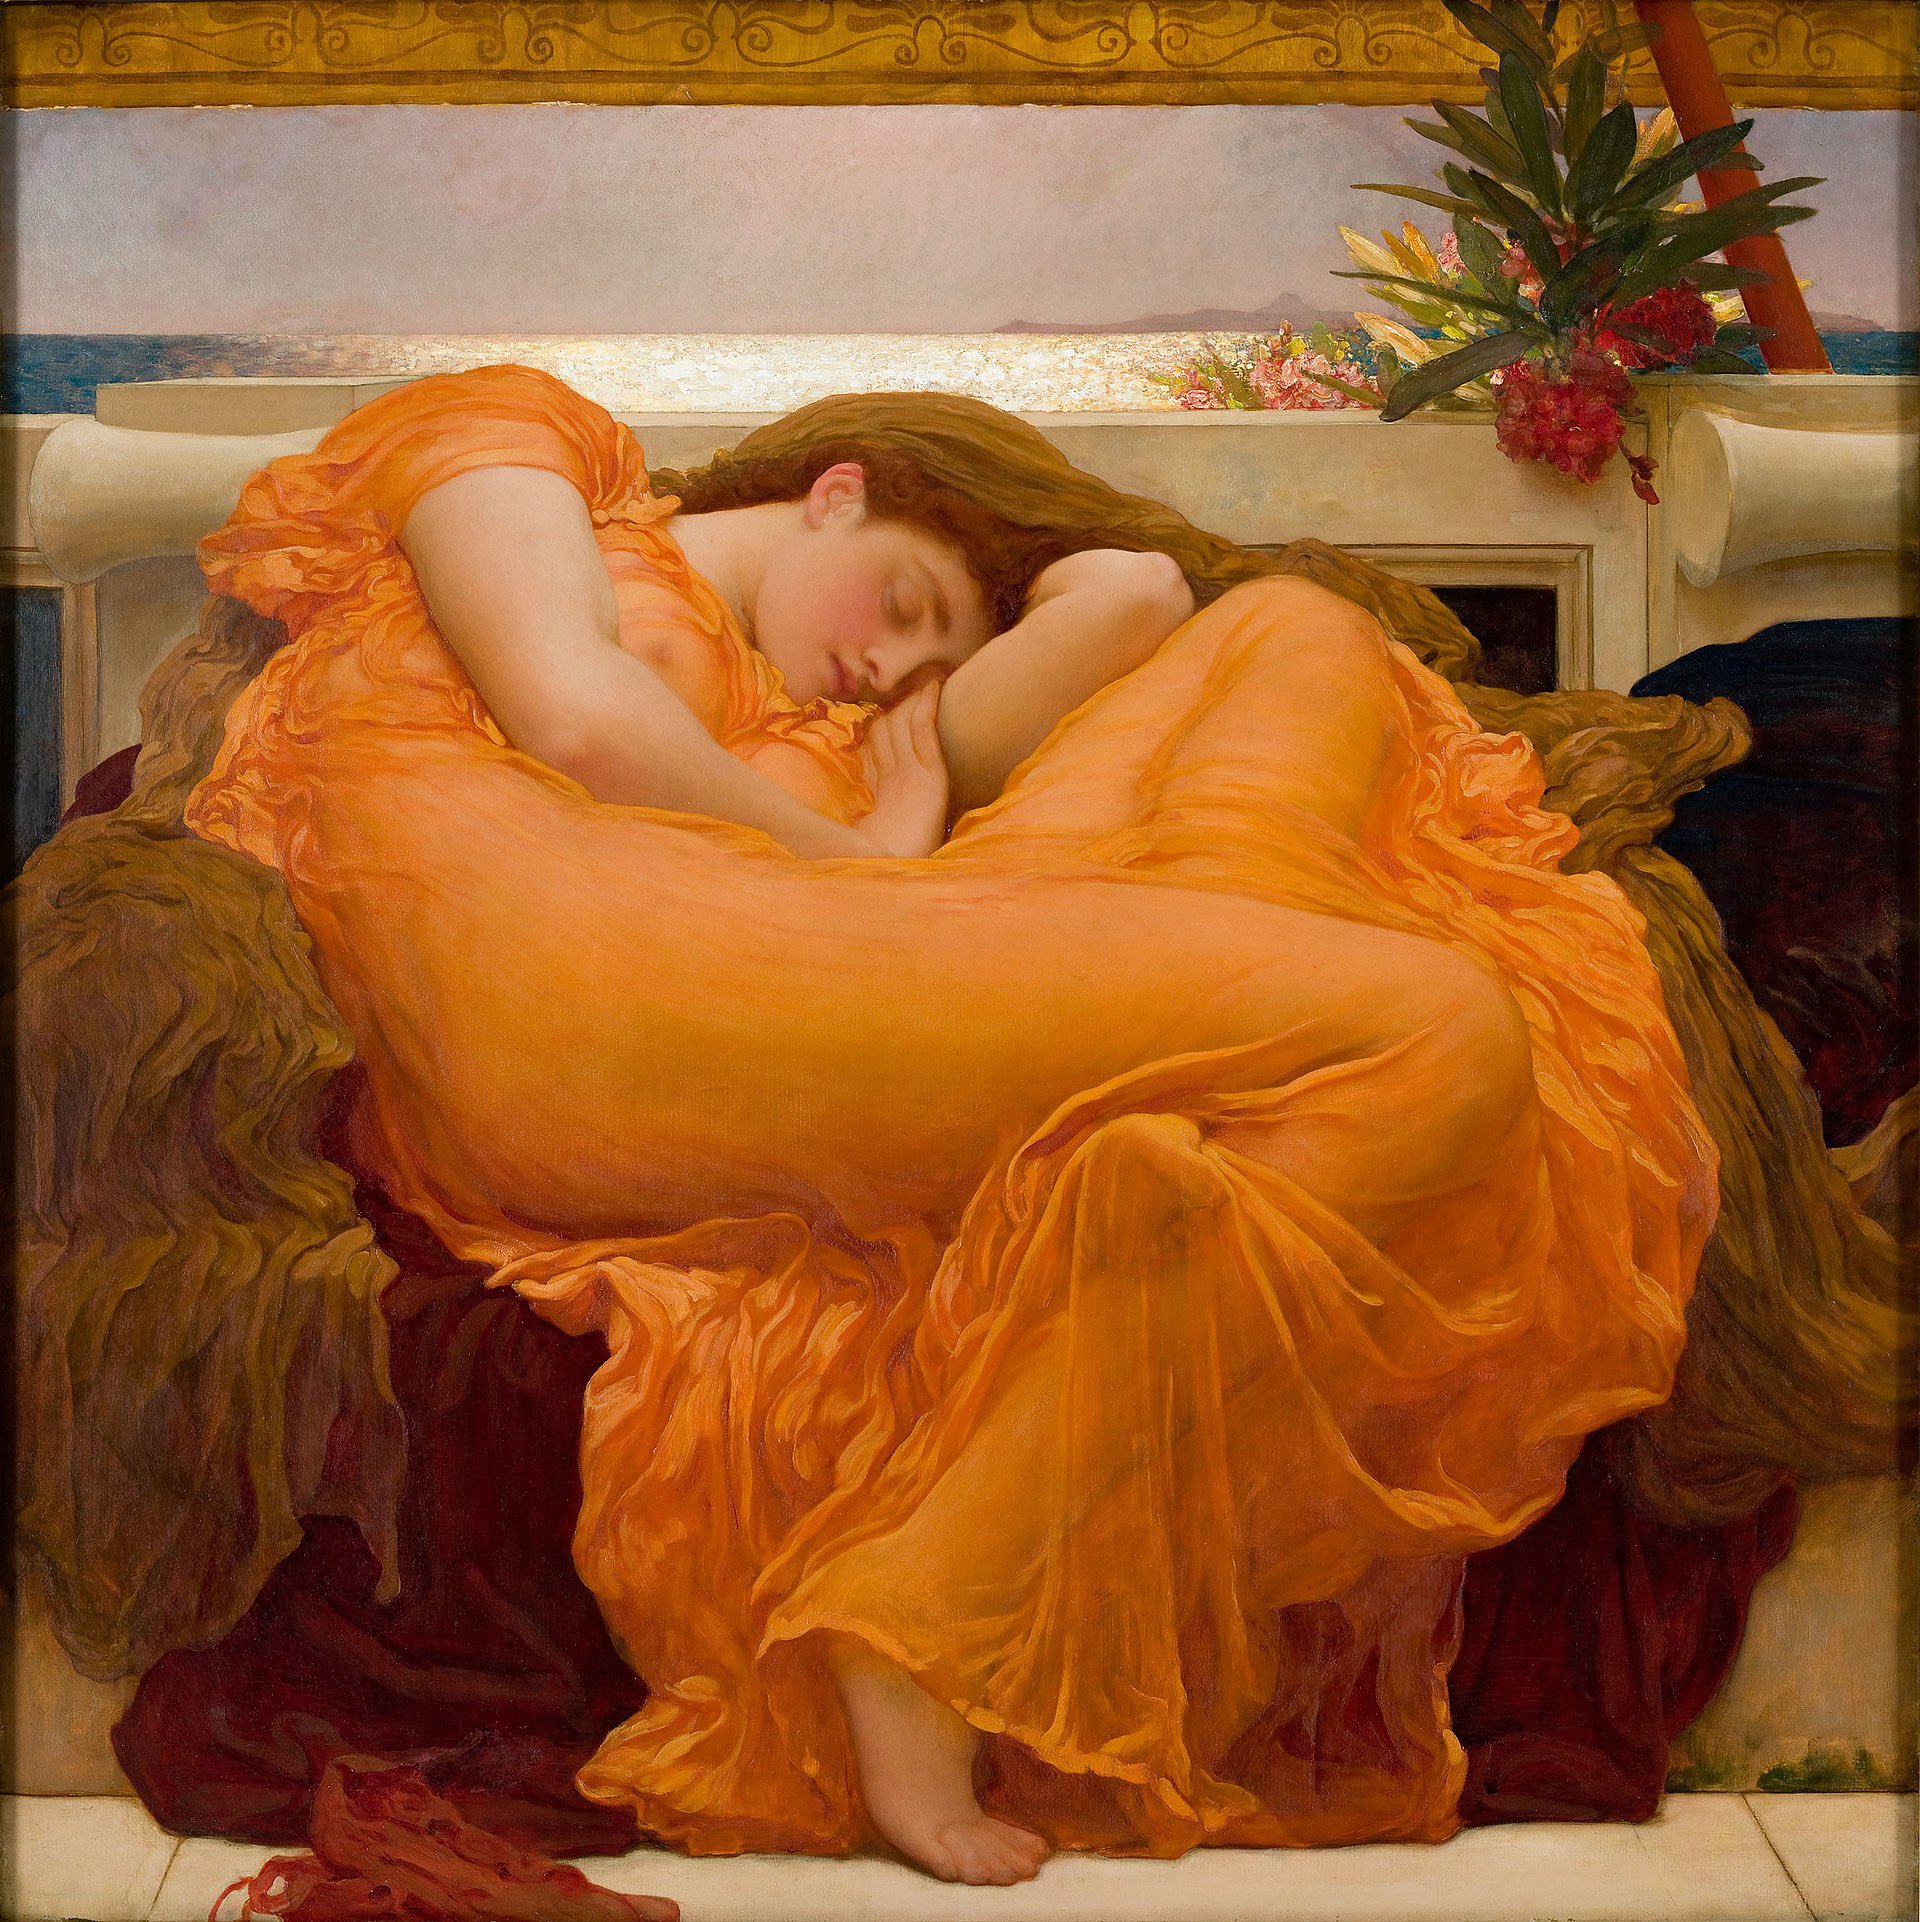 The original Flaming June by Frederic Leighton